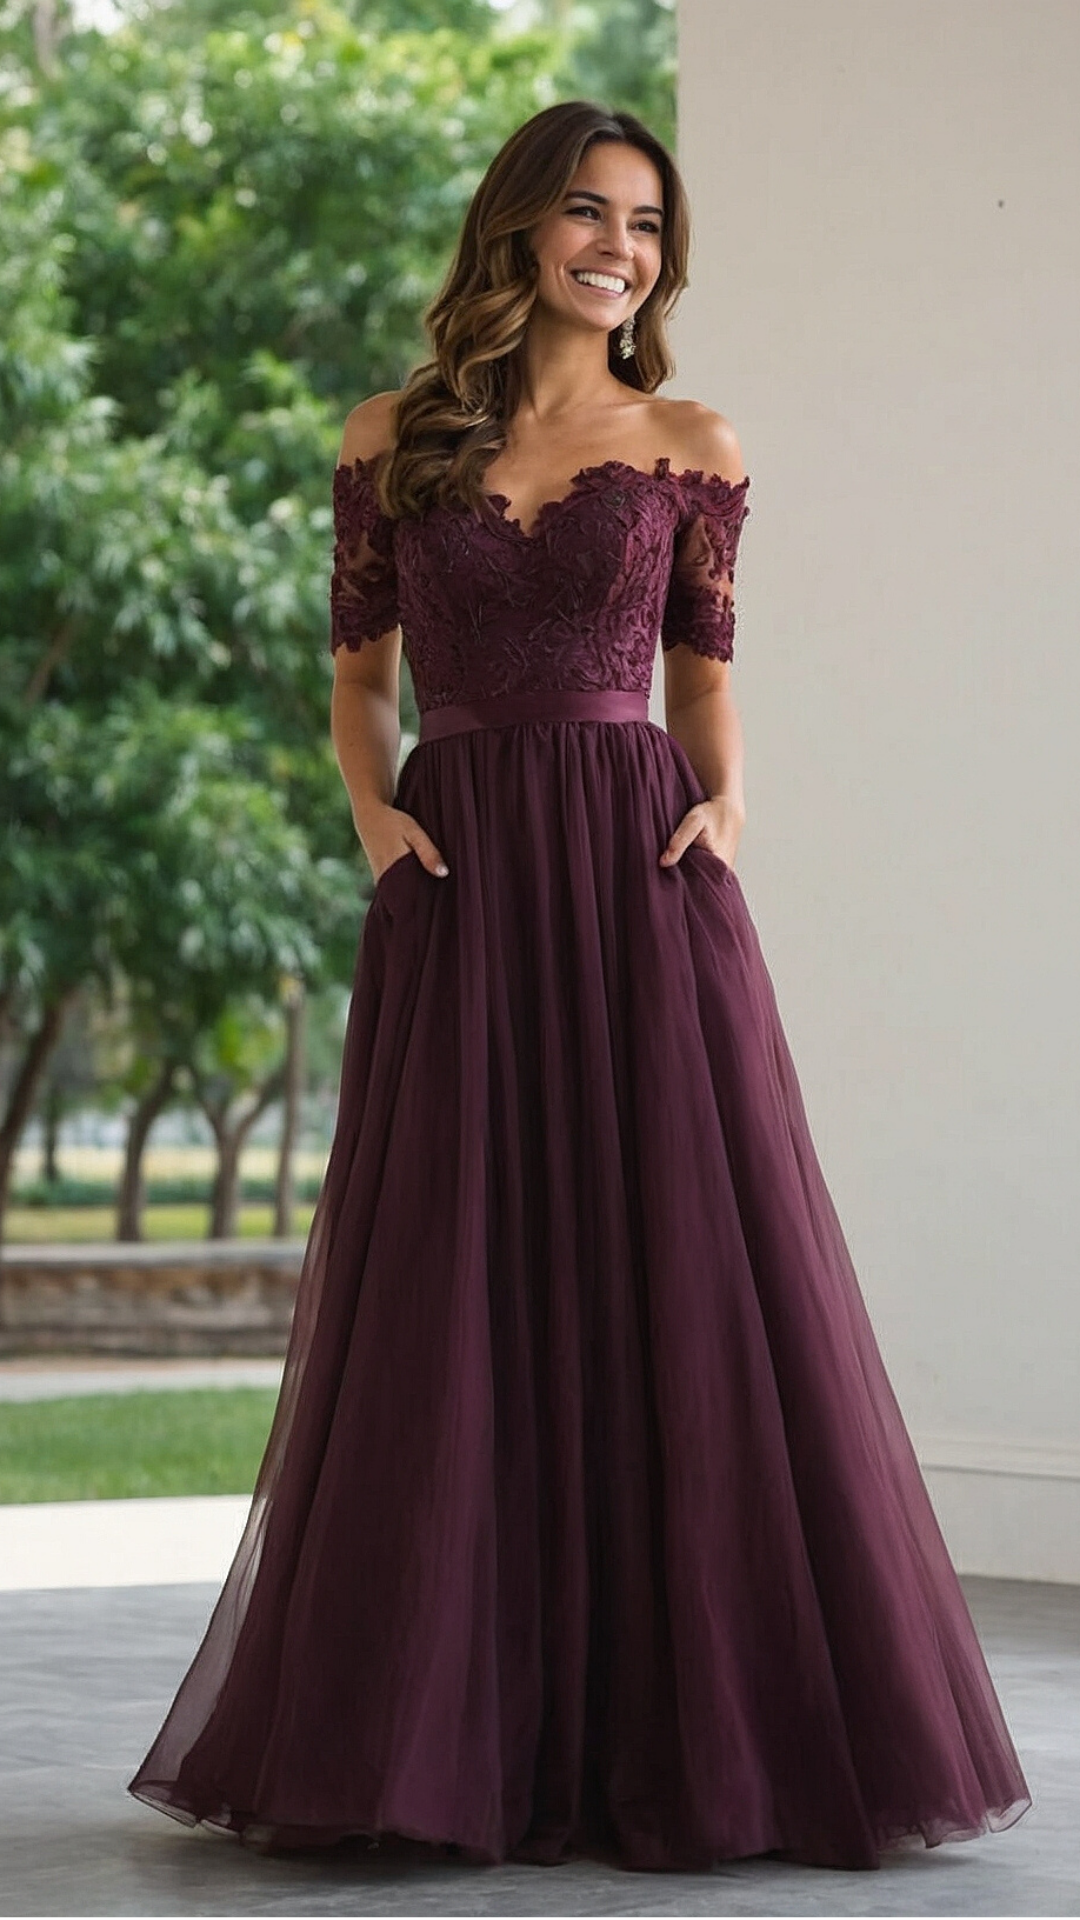 Elegance in Embroidery: Beautiful Frock Outfits